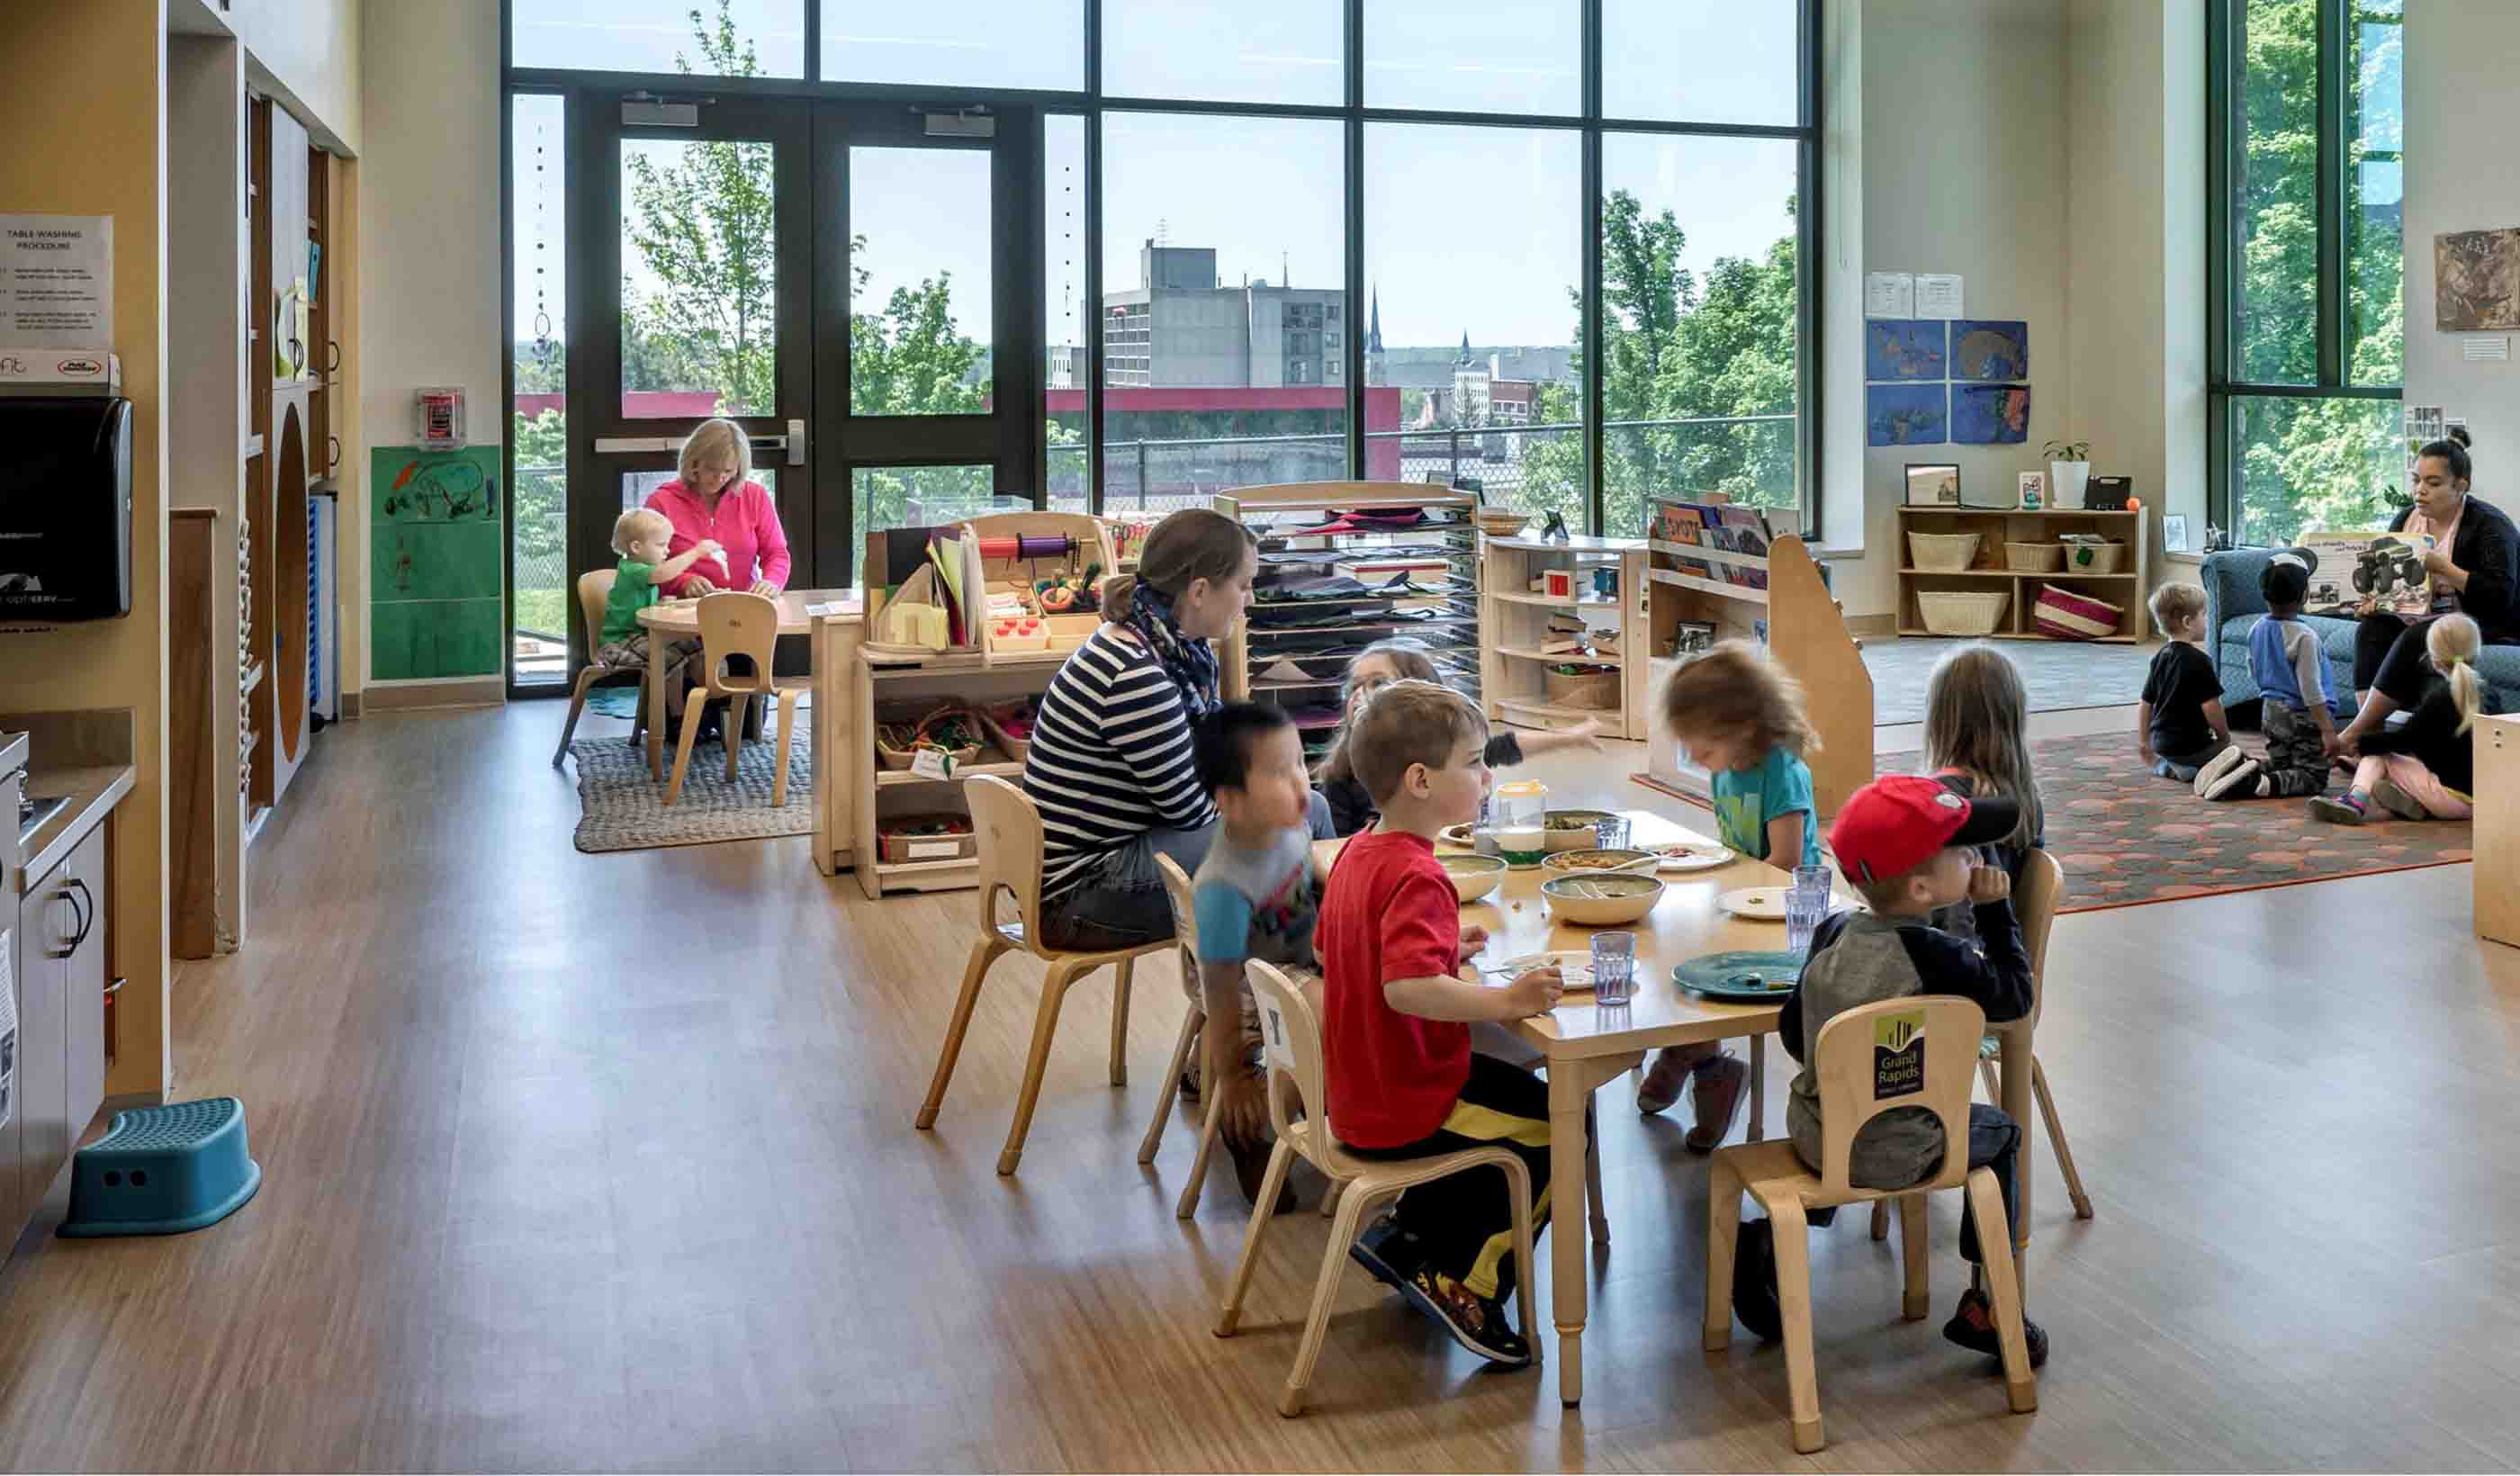 Early education case study: Using design to nurture diverse learners